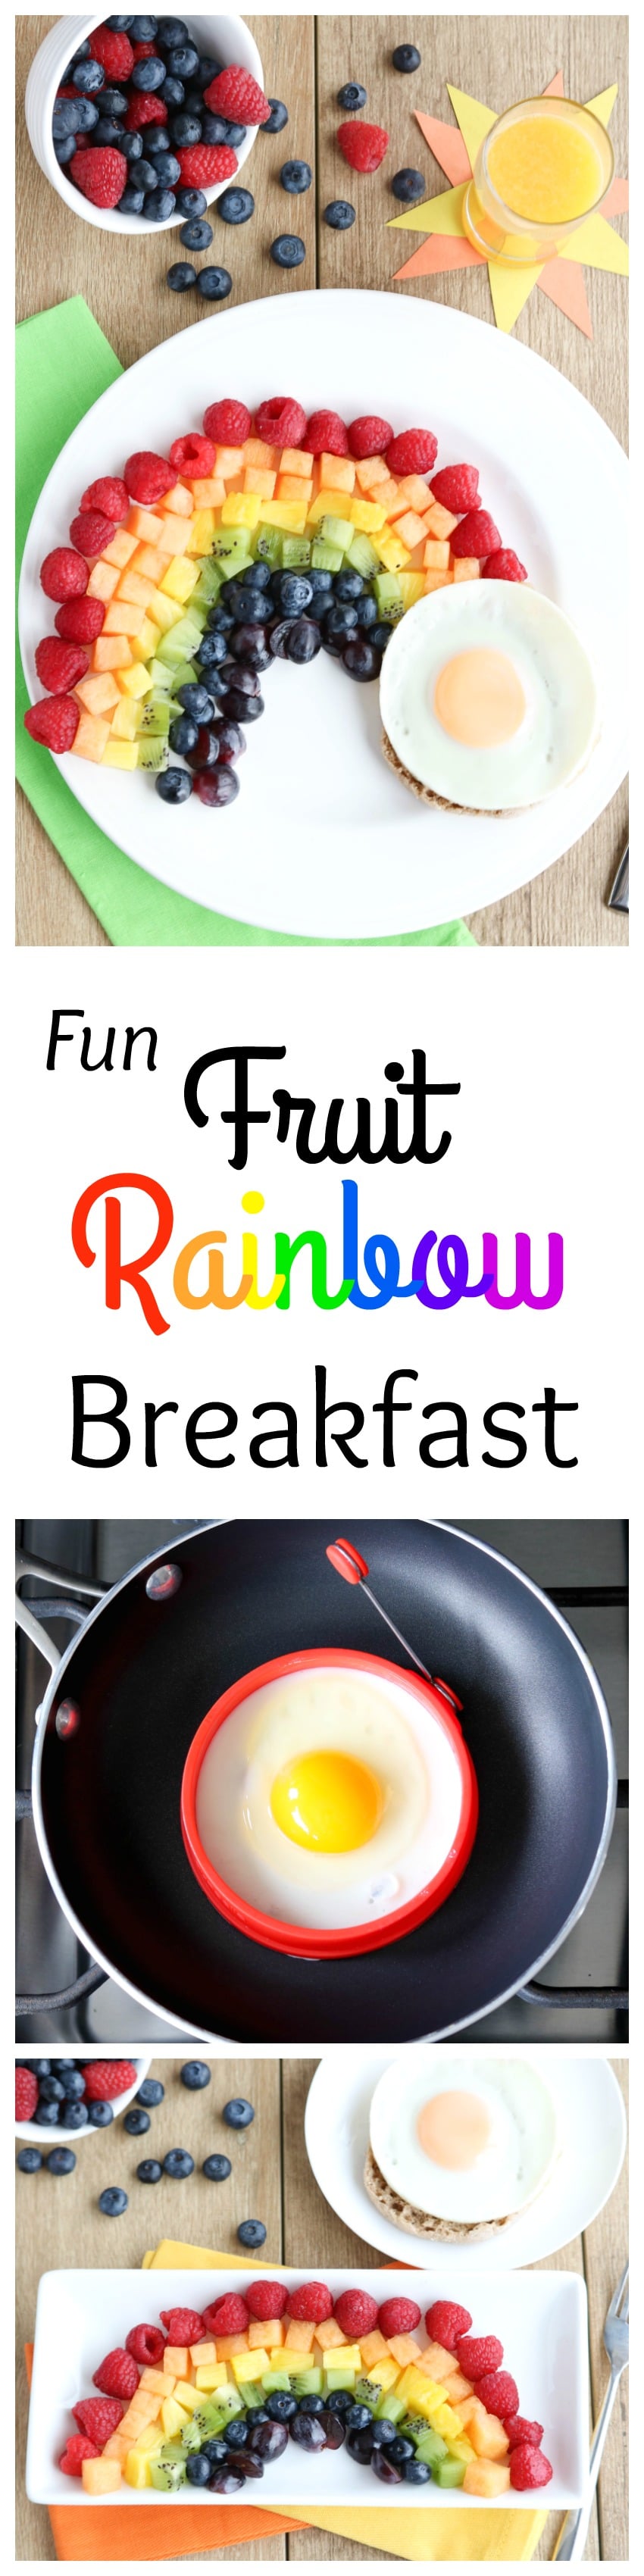 Your kids will love this Fruit Rainbow Breakfast recipe … complete with a pot o’ gold! And you'll love all the great nutrition - literally eating a rainbow! A fun, healthy breakfast idea! | www.TwoHealthyKitchens.com